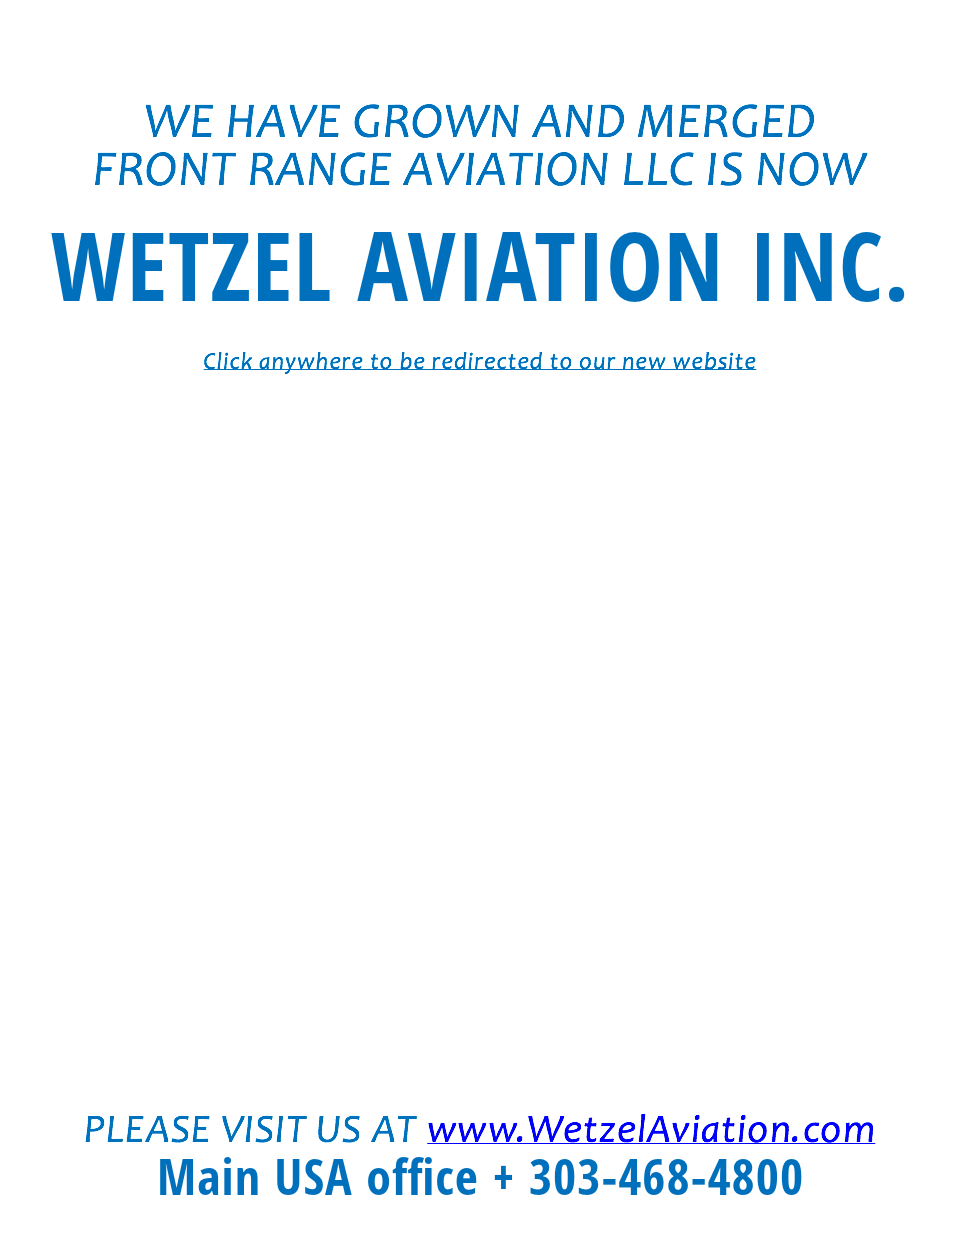  WE HAVE GROWN AND MERGED FRONT RANGE AVIATION LLC IS NOW WETZEL AVIATION INC. Click anywhere to be redirected to our new website PLEASE VISIT US AT www.WetzelAviation.com Main USA office + 303-468-4800 